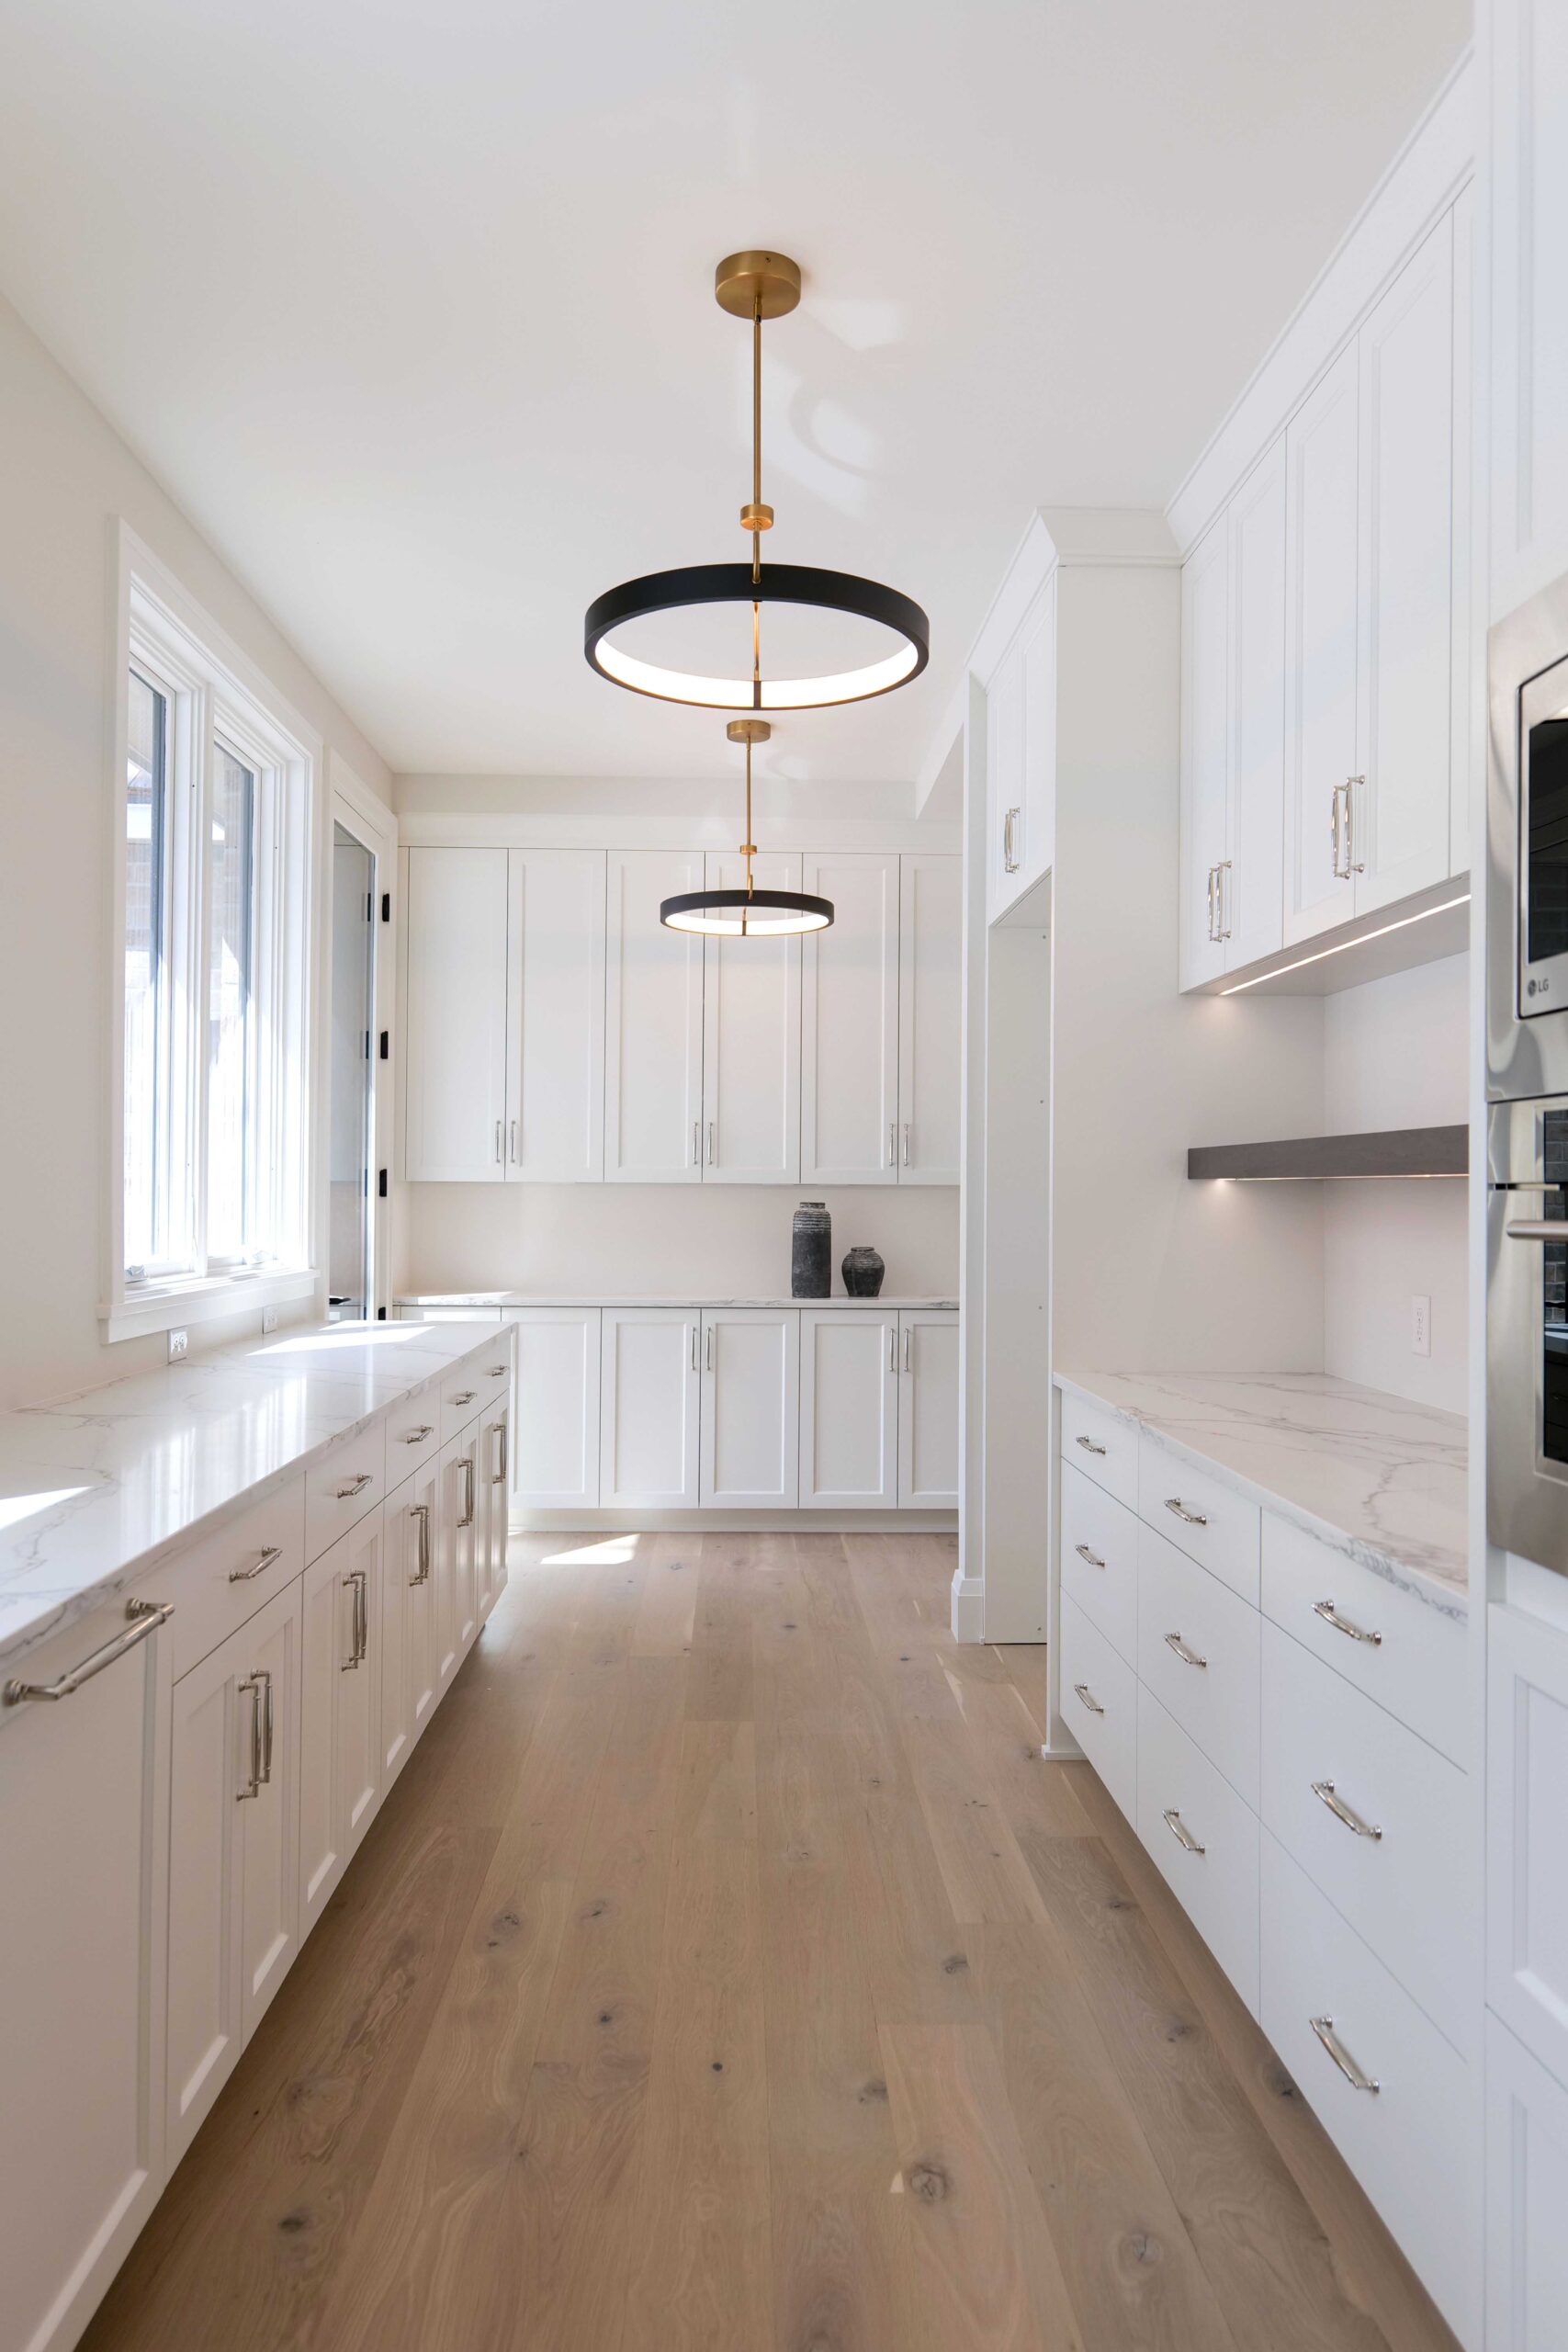 A white kitchen with hardwood floors and a pendant light.